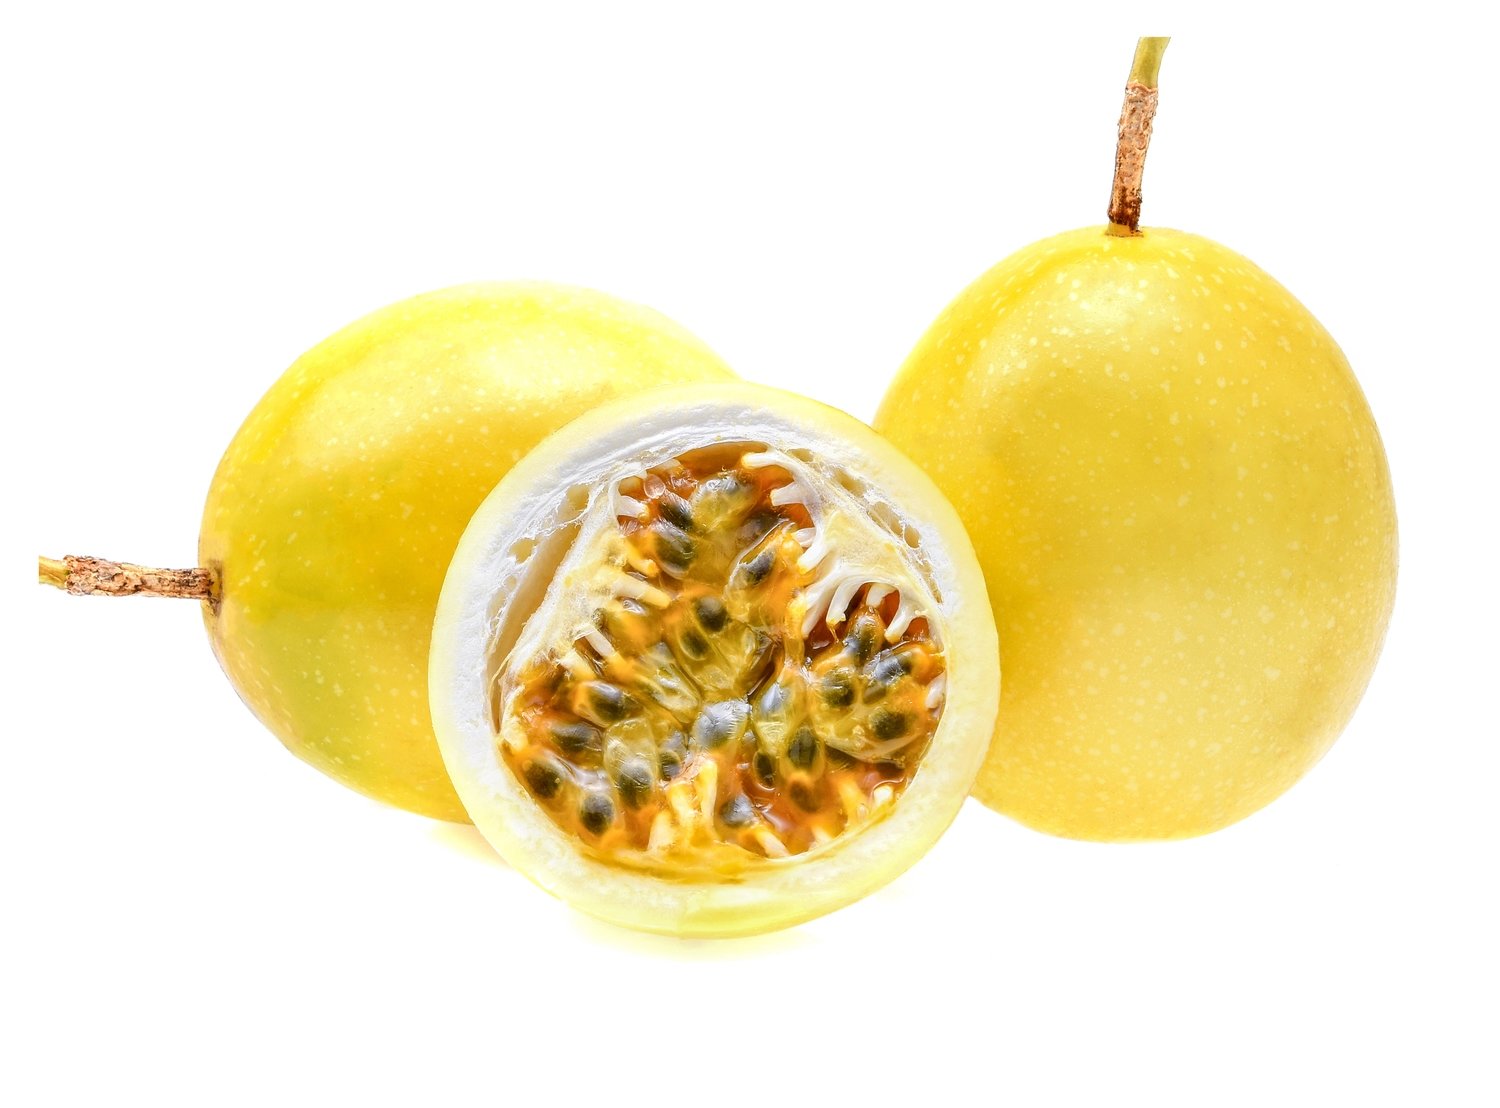 Yellow Passion Fruit -  24 plump fruits (or Equivalent 5 pounds) box - Fresh - Aromatic & Flavorful - Florida Grown - Tropical, Seasonal, FREE SHIPPING